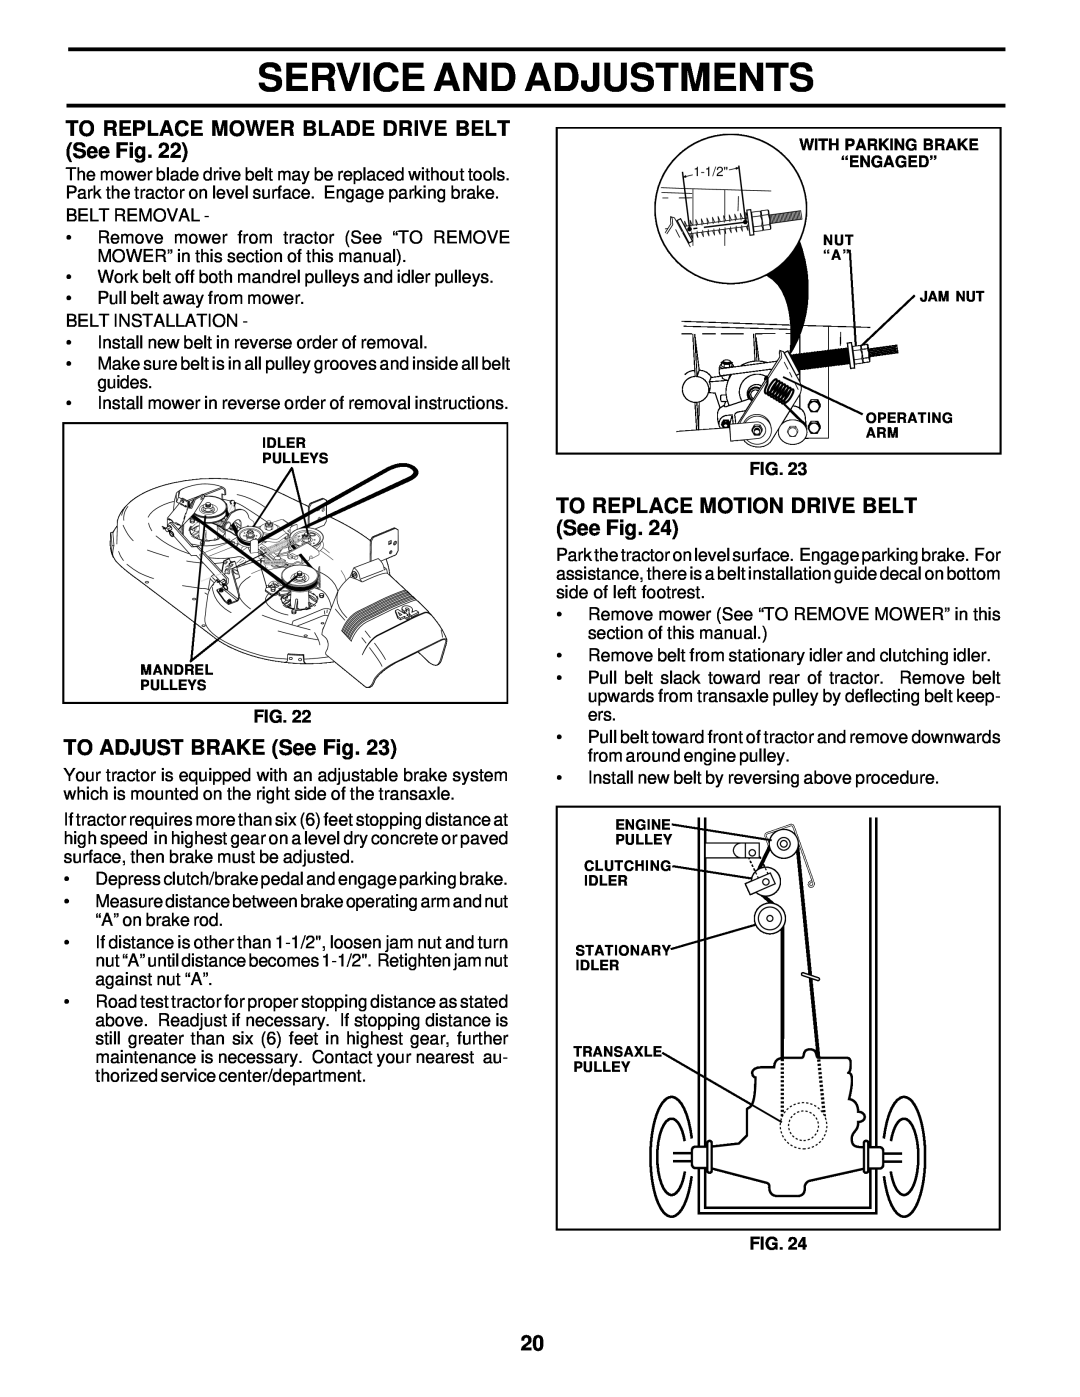 Poulan PRK17G42STB TO REPLACE MOWER BLADE DRIVE BELT See Fig, TO ADJUST BRAKE See Fig, Service And Adjustments, “Engaged” 